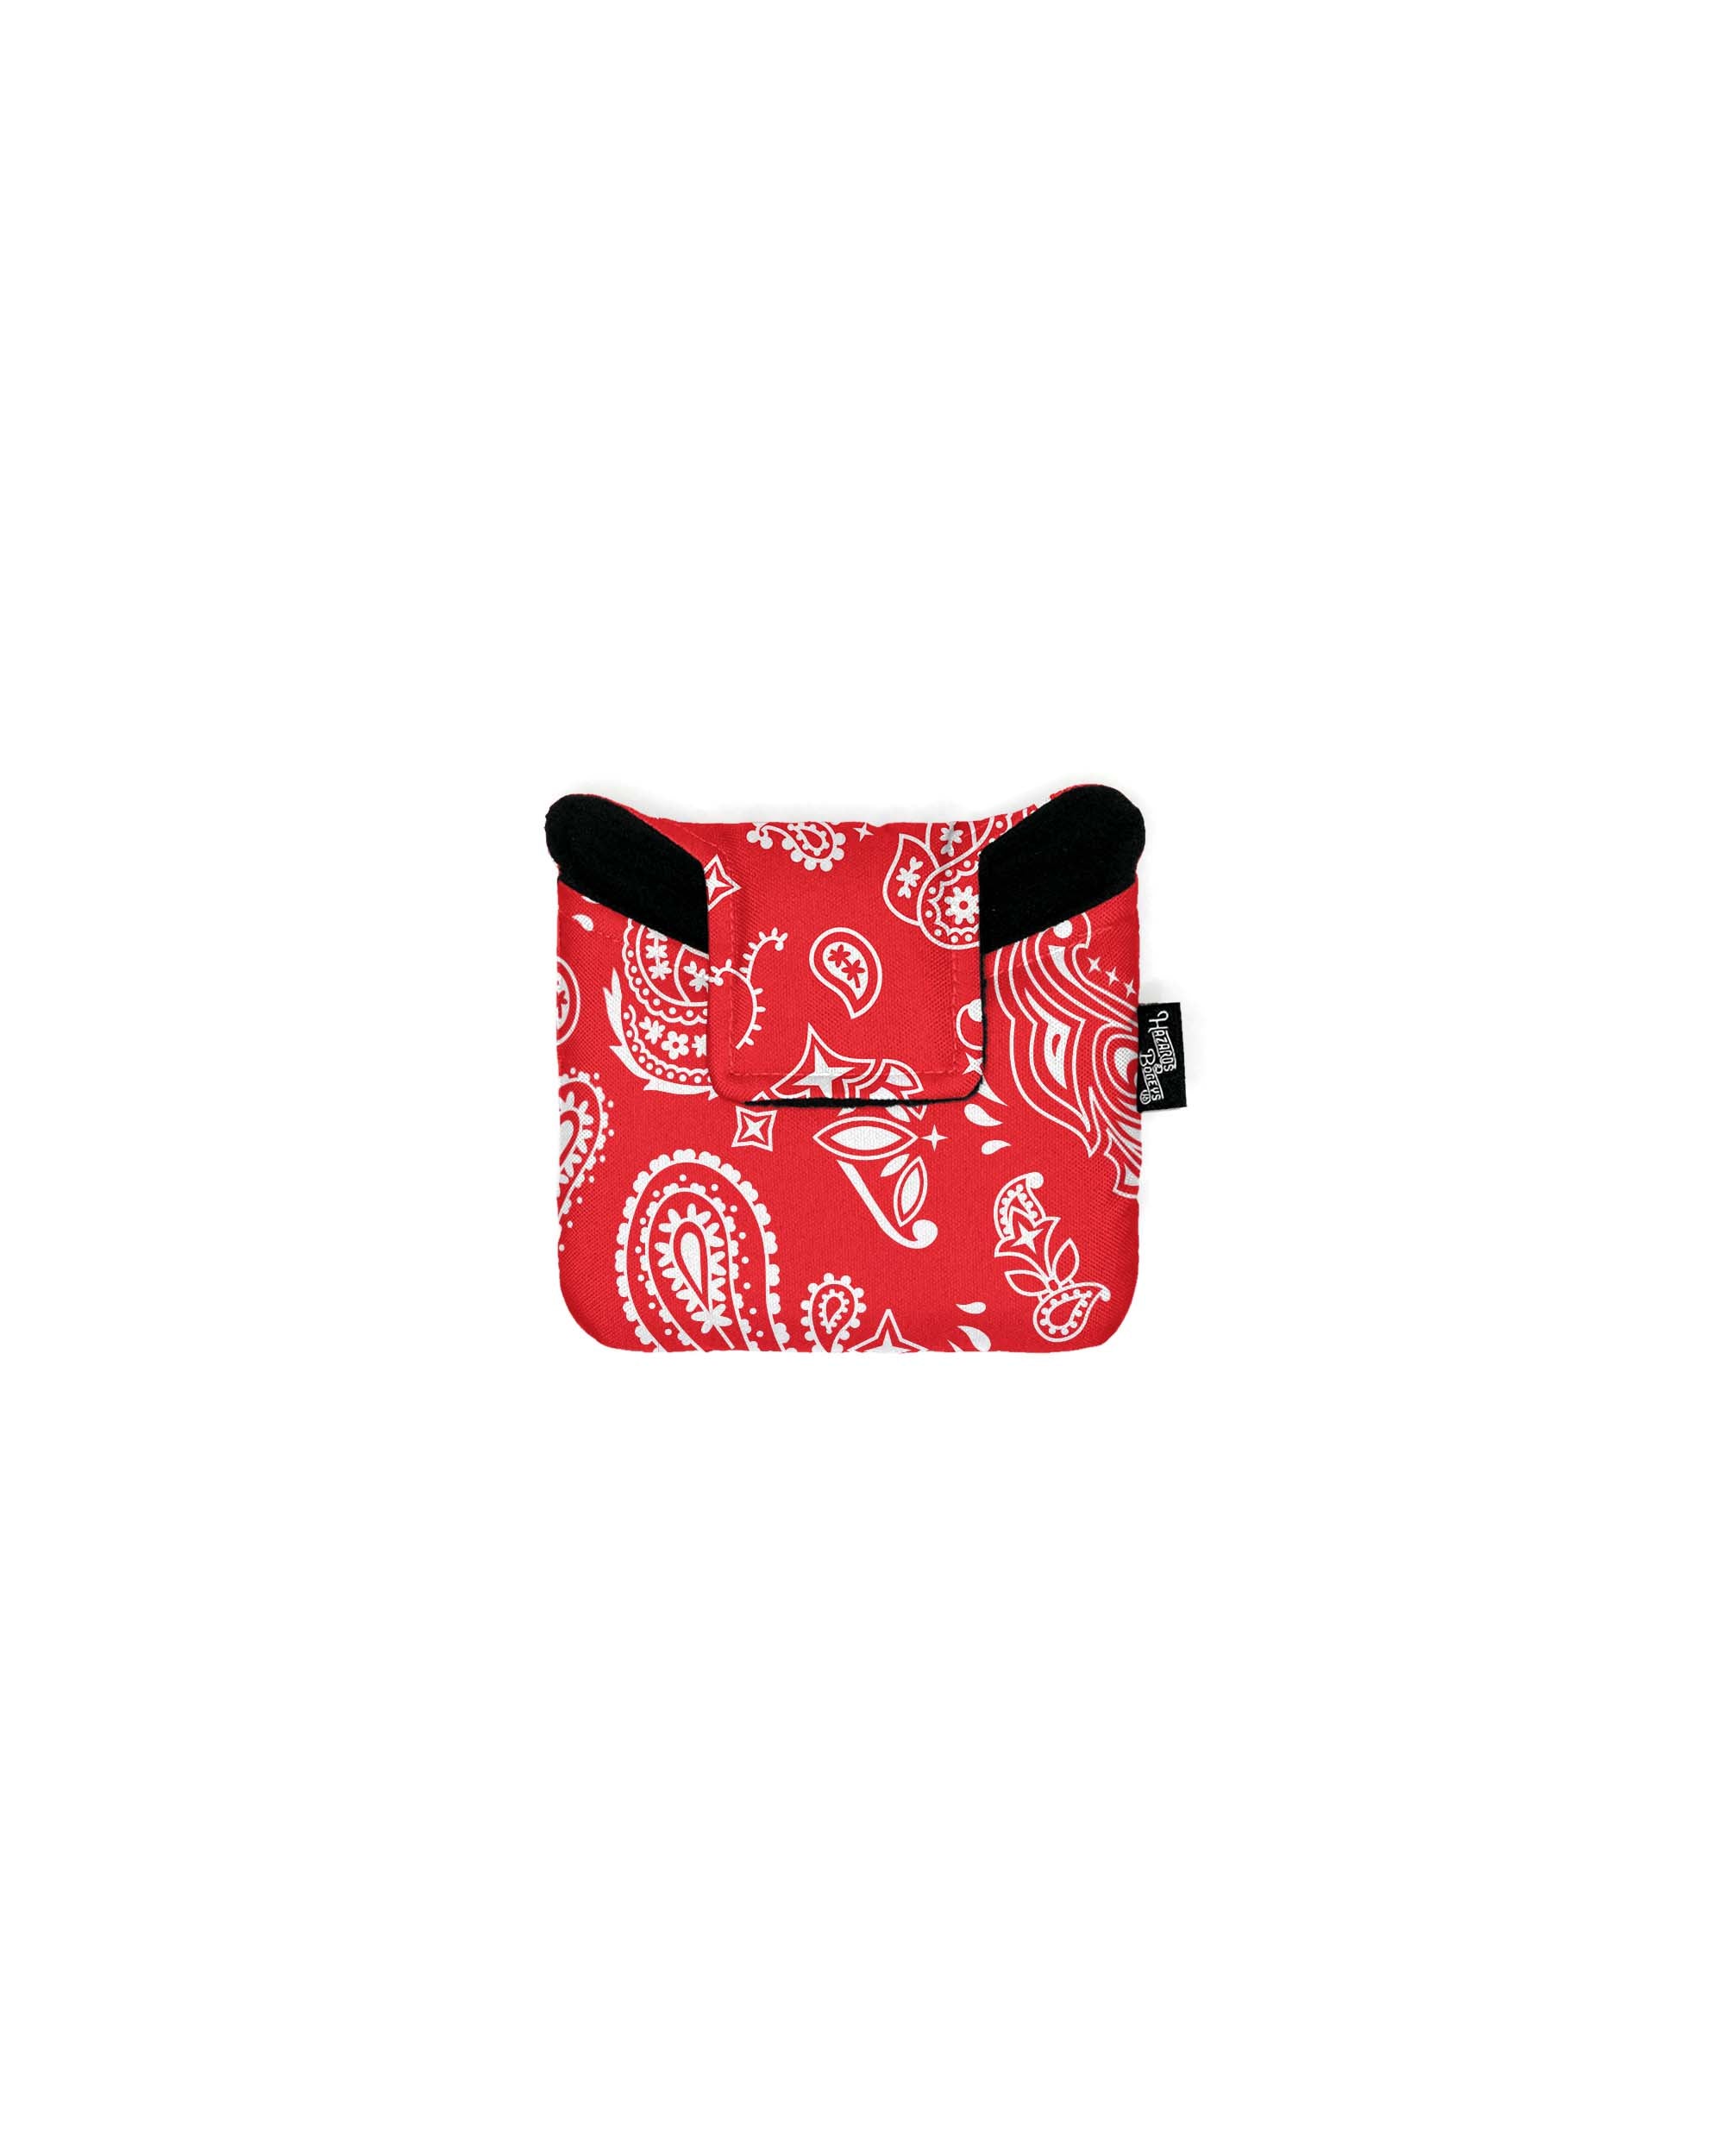 Bandana Red Mallet Putter Cover